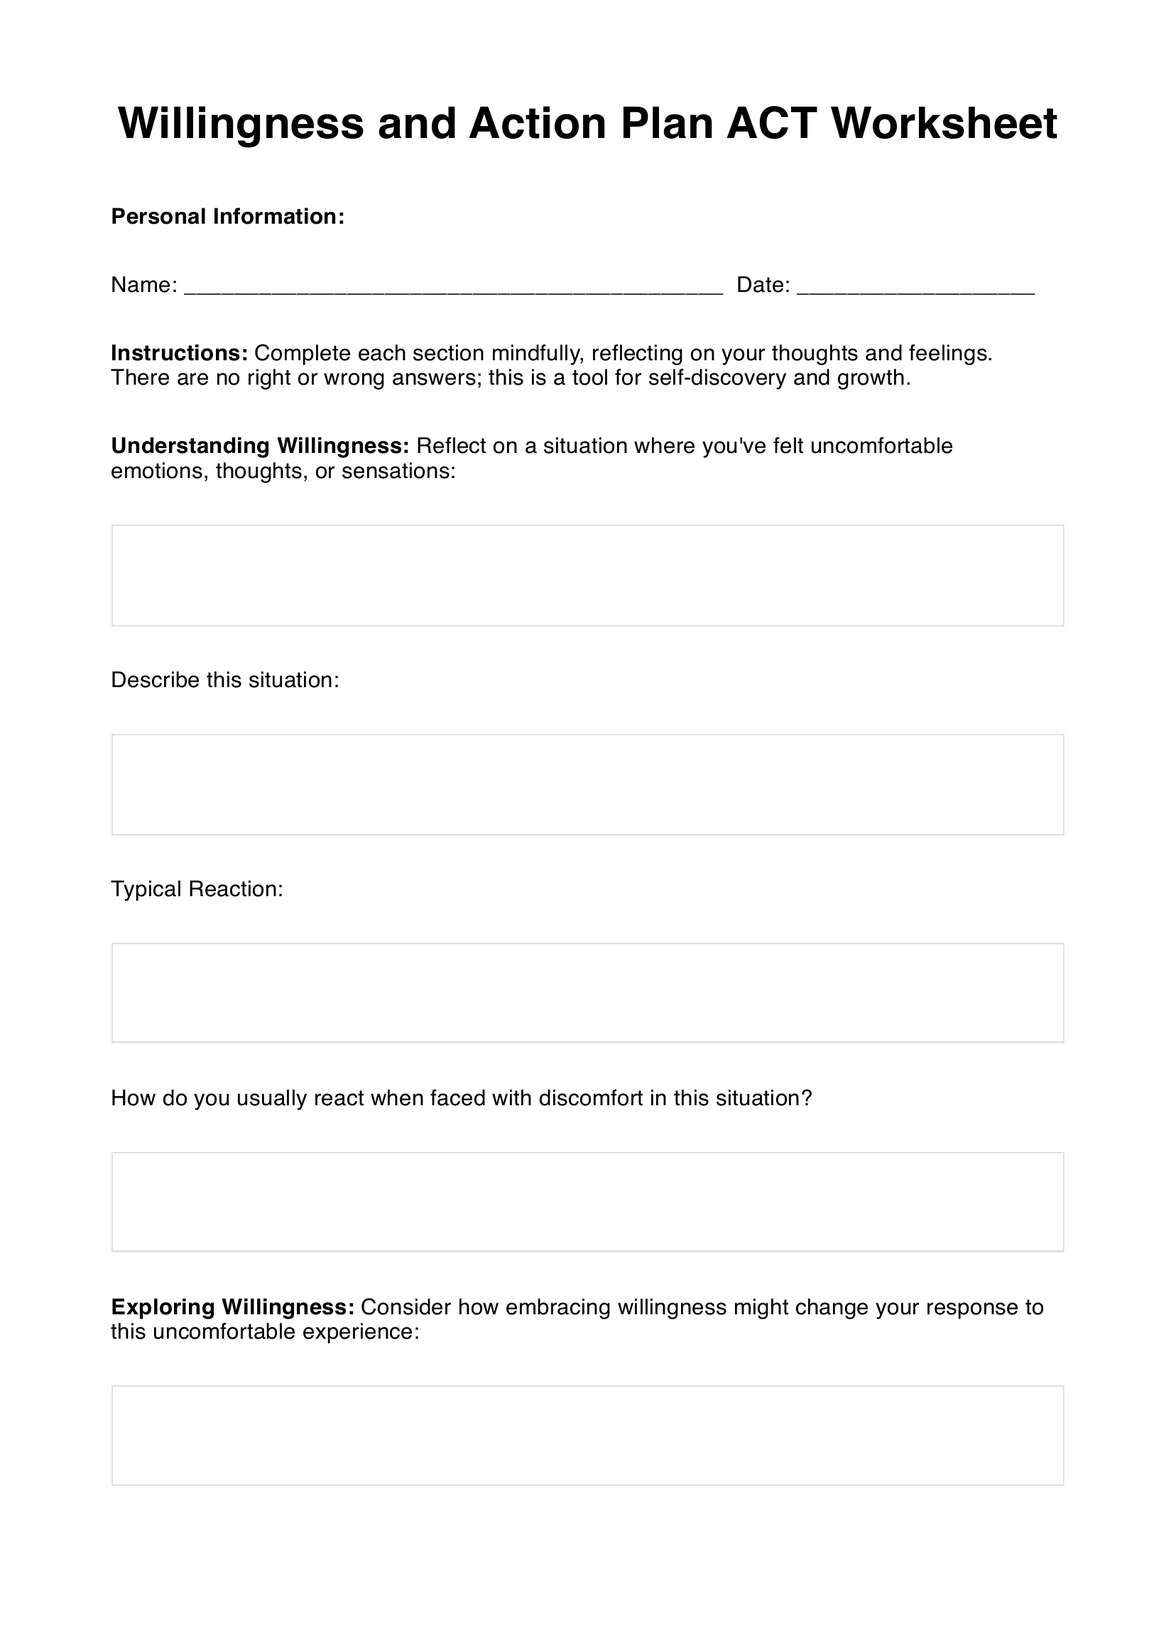 Willingness and Action Plan ACT Worksheet PDF Example